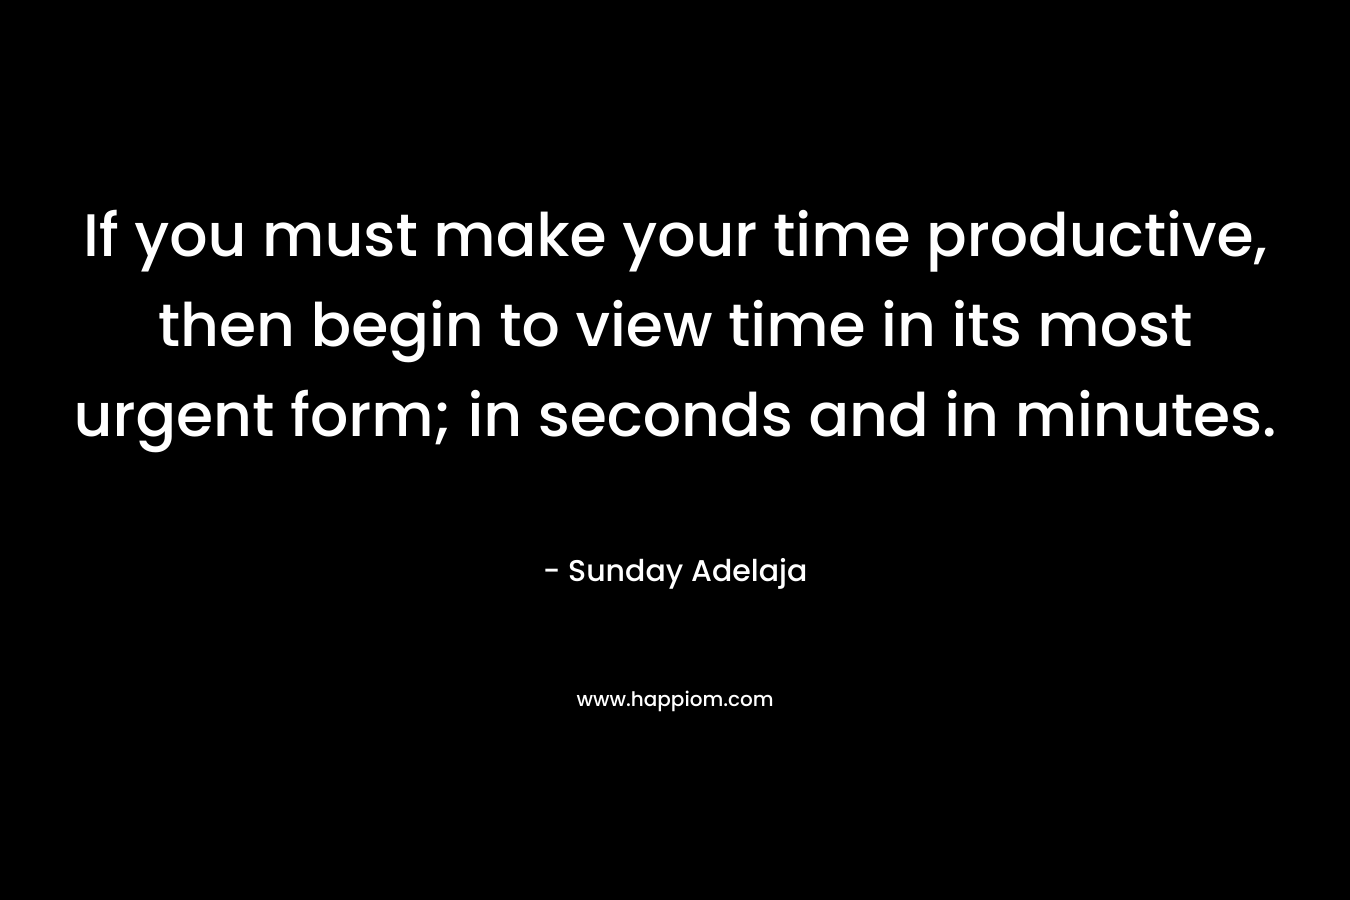 If you must make your time productive, then begin to view time in its most urgent form; in seconds and in minutes.